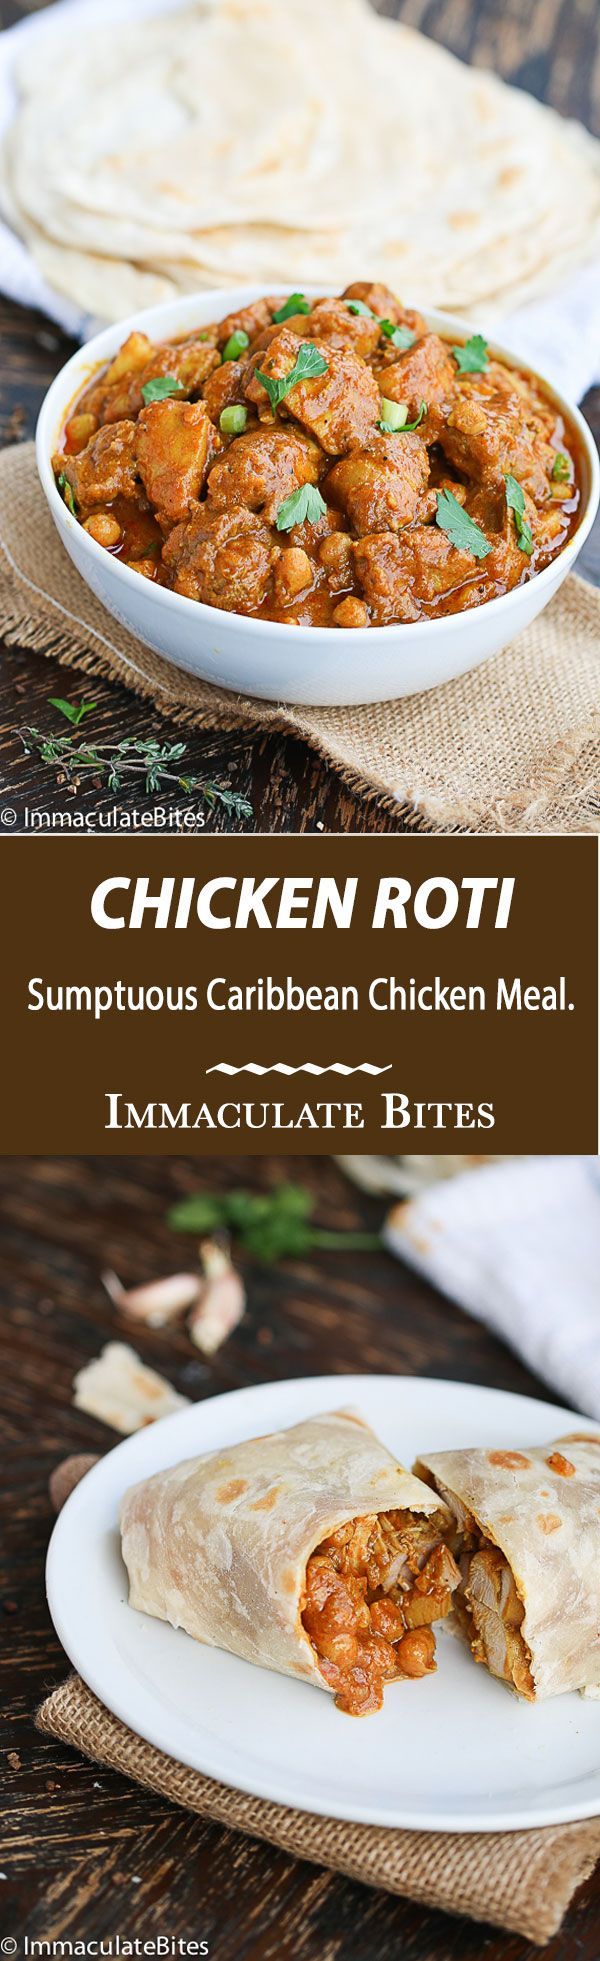 Trinidad Chicken Roti- An incredible chicken meal that would excite your taste buds. Rich in spices, chick